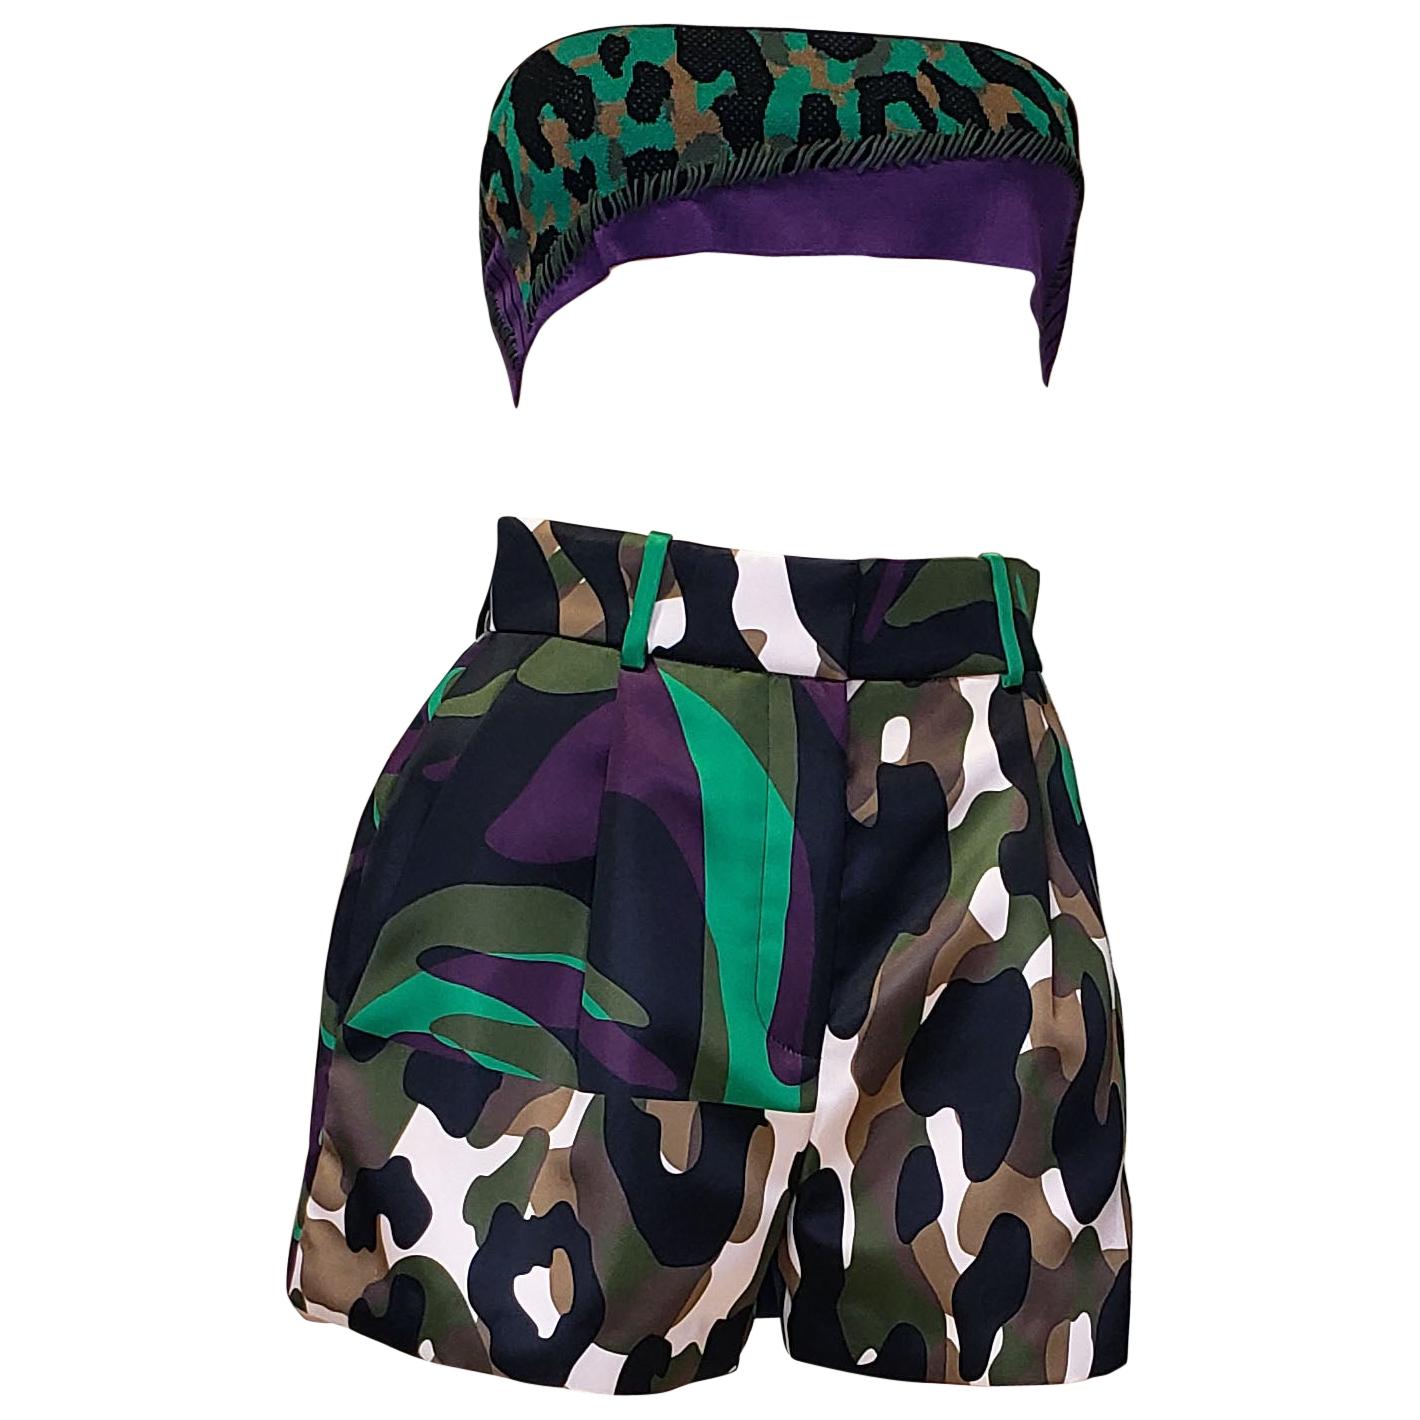 S/S 2016 Look # 31 NEW VERSACE MILITARY CAMOUFLAGE PRINTED SHORTS 38 - 2